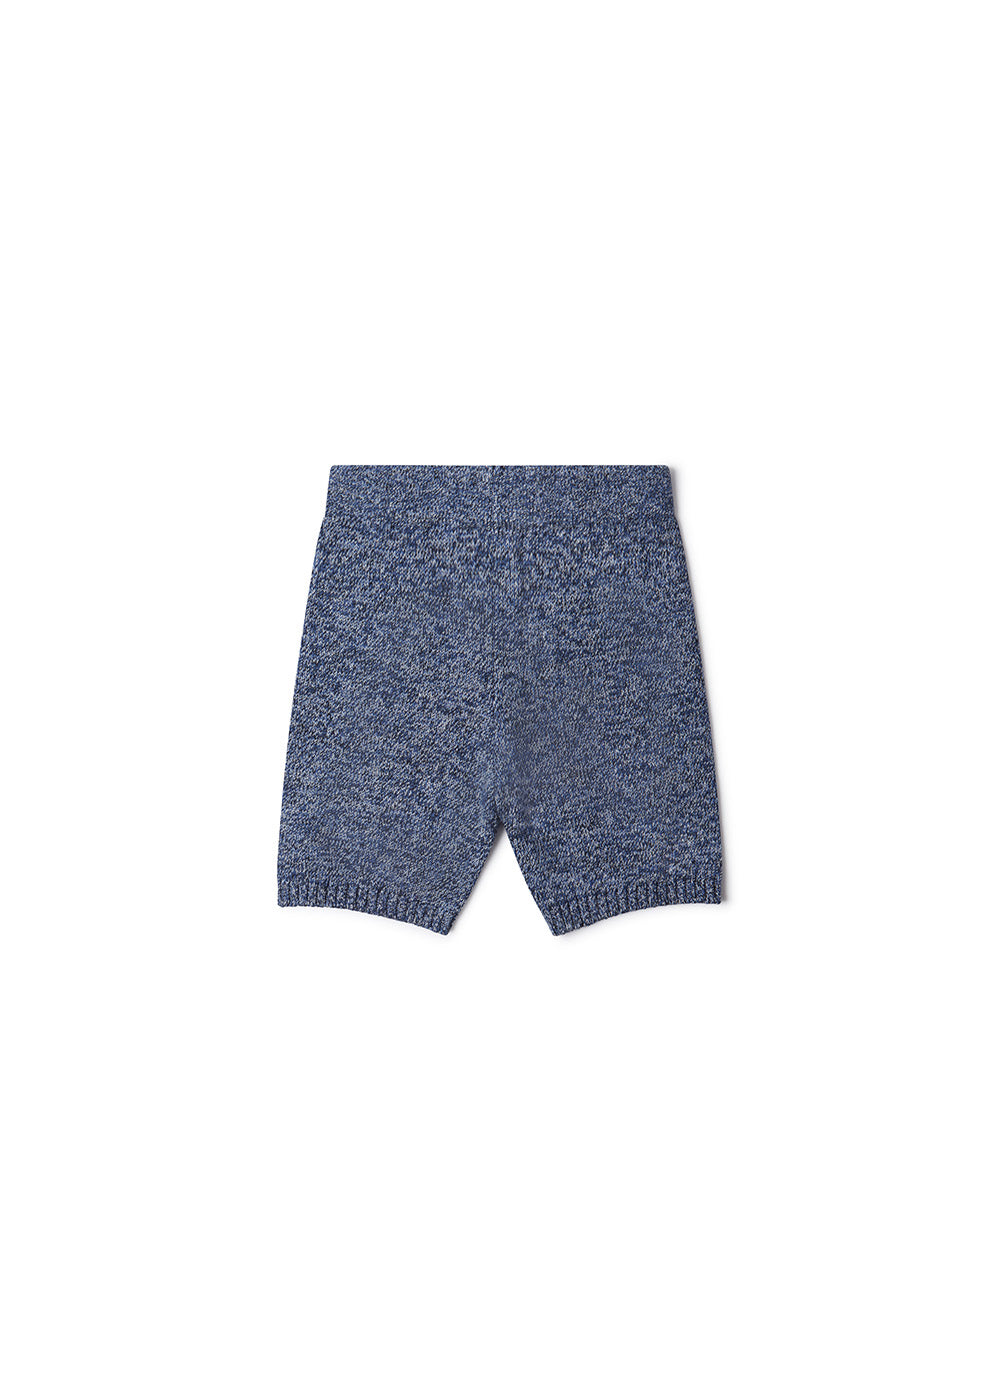 York Knitted Shorts - 4Y-6Y / Navy and Mixed blue